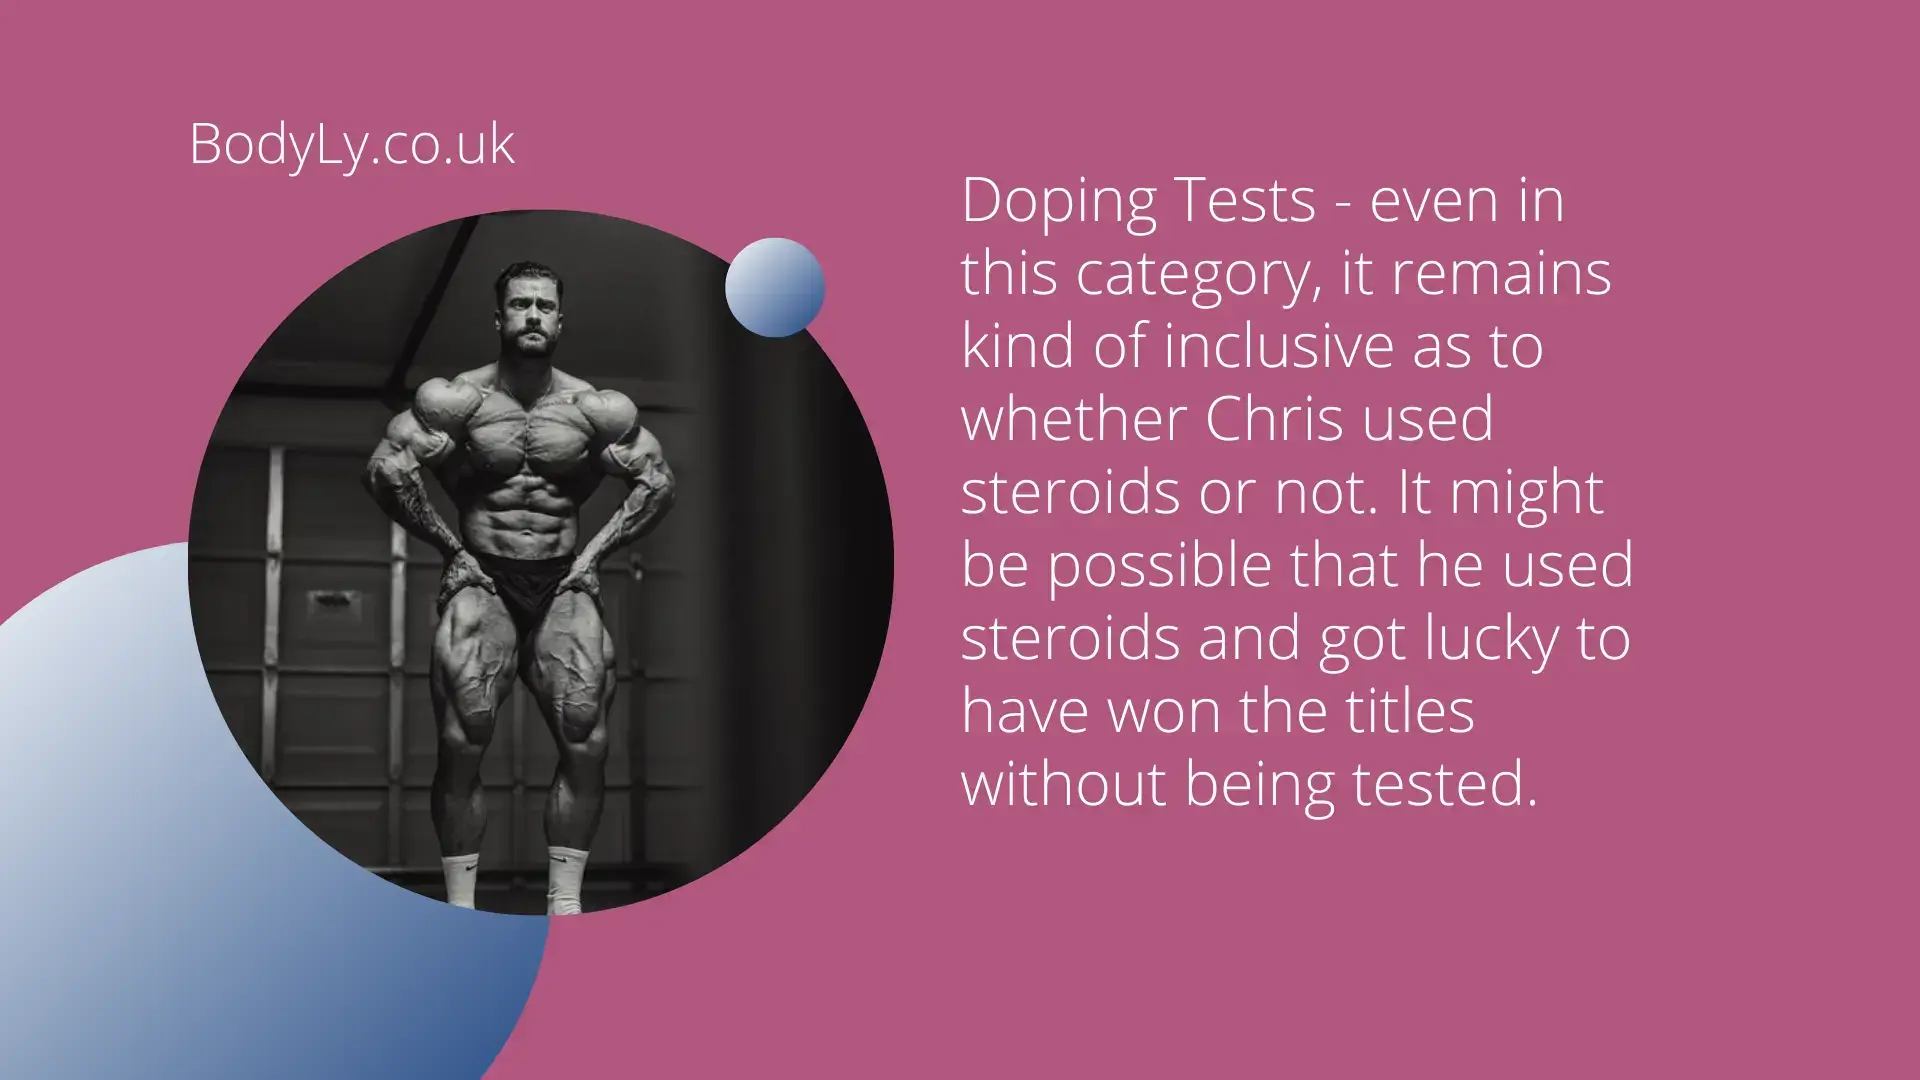 Doping tests